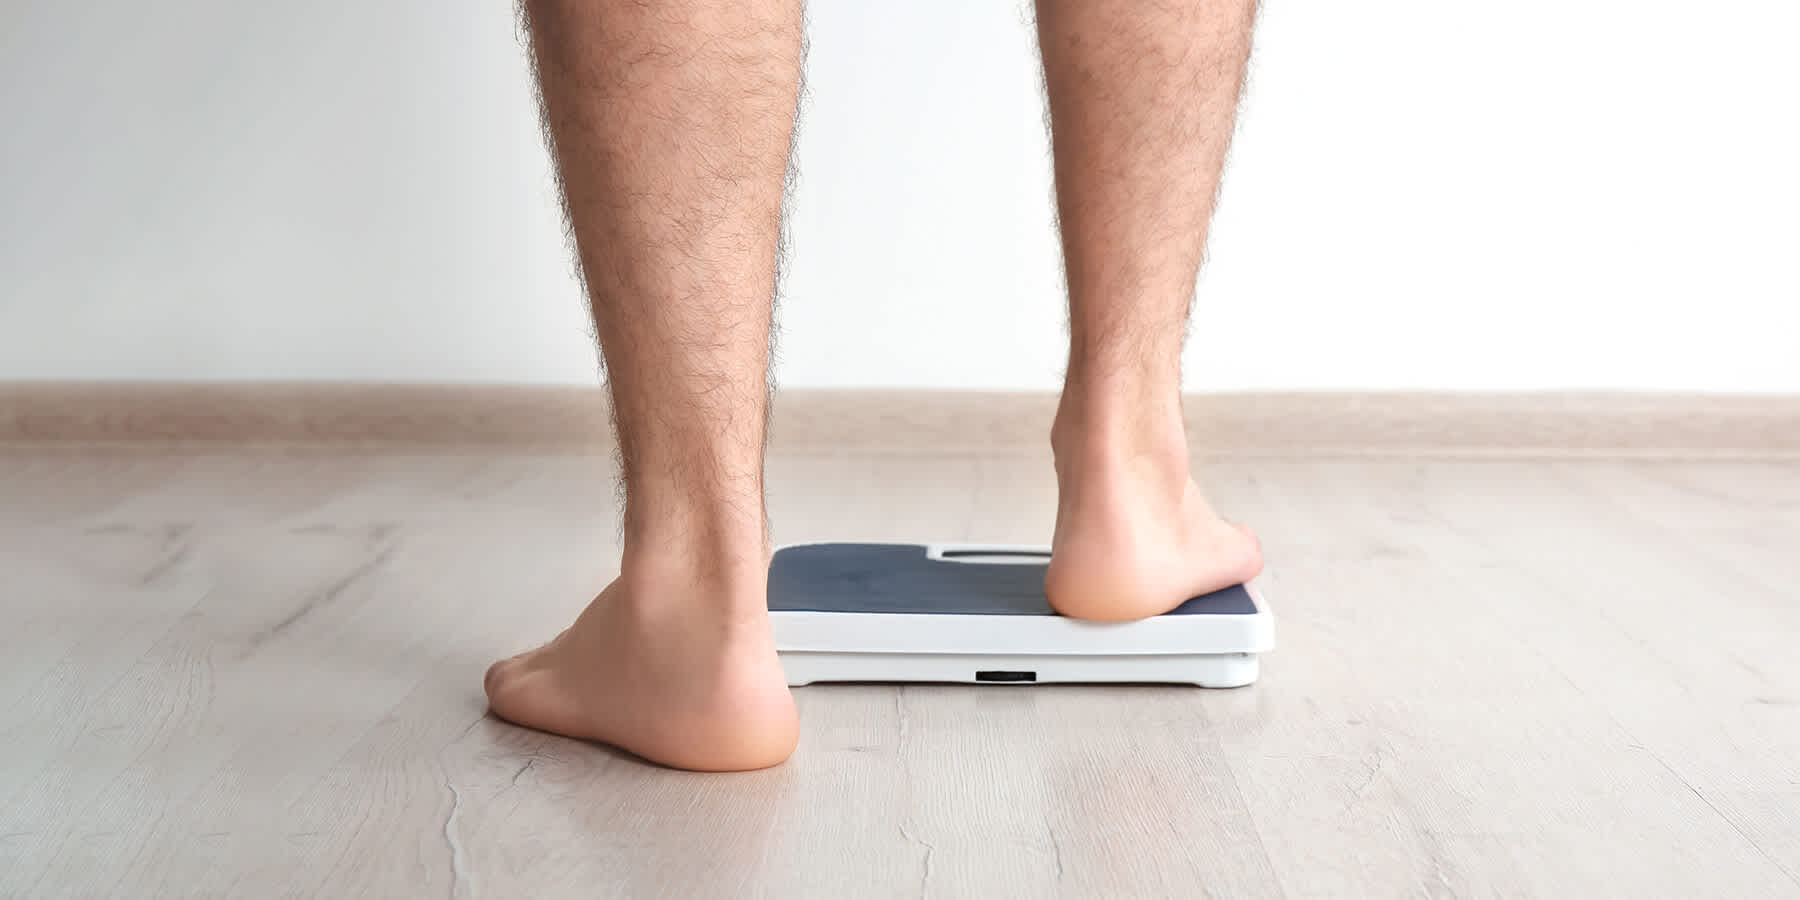 Man standing on bathroom scale after taking semaglutide for weight loss as a non-diabetic